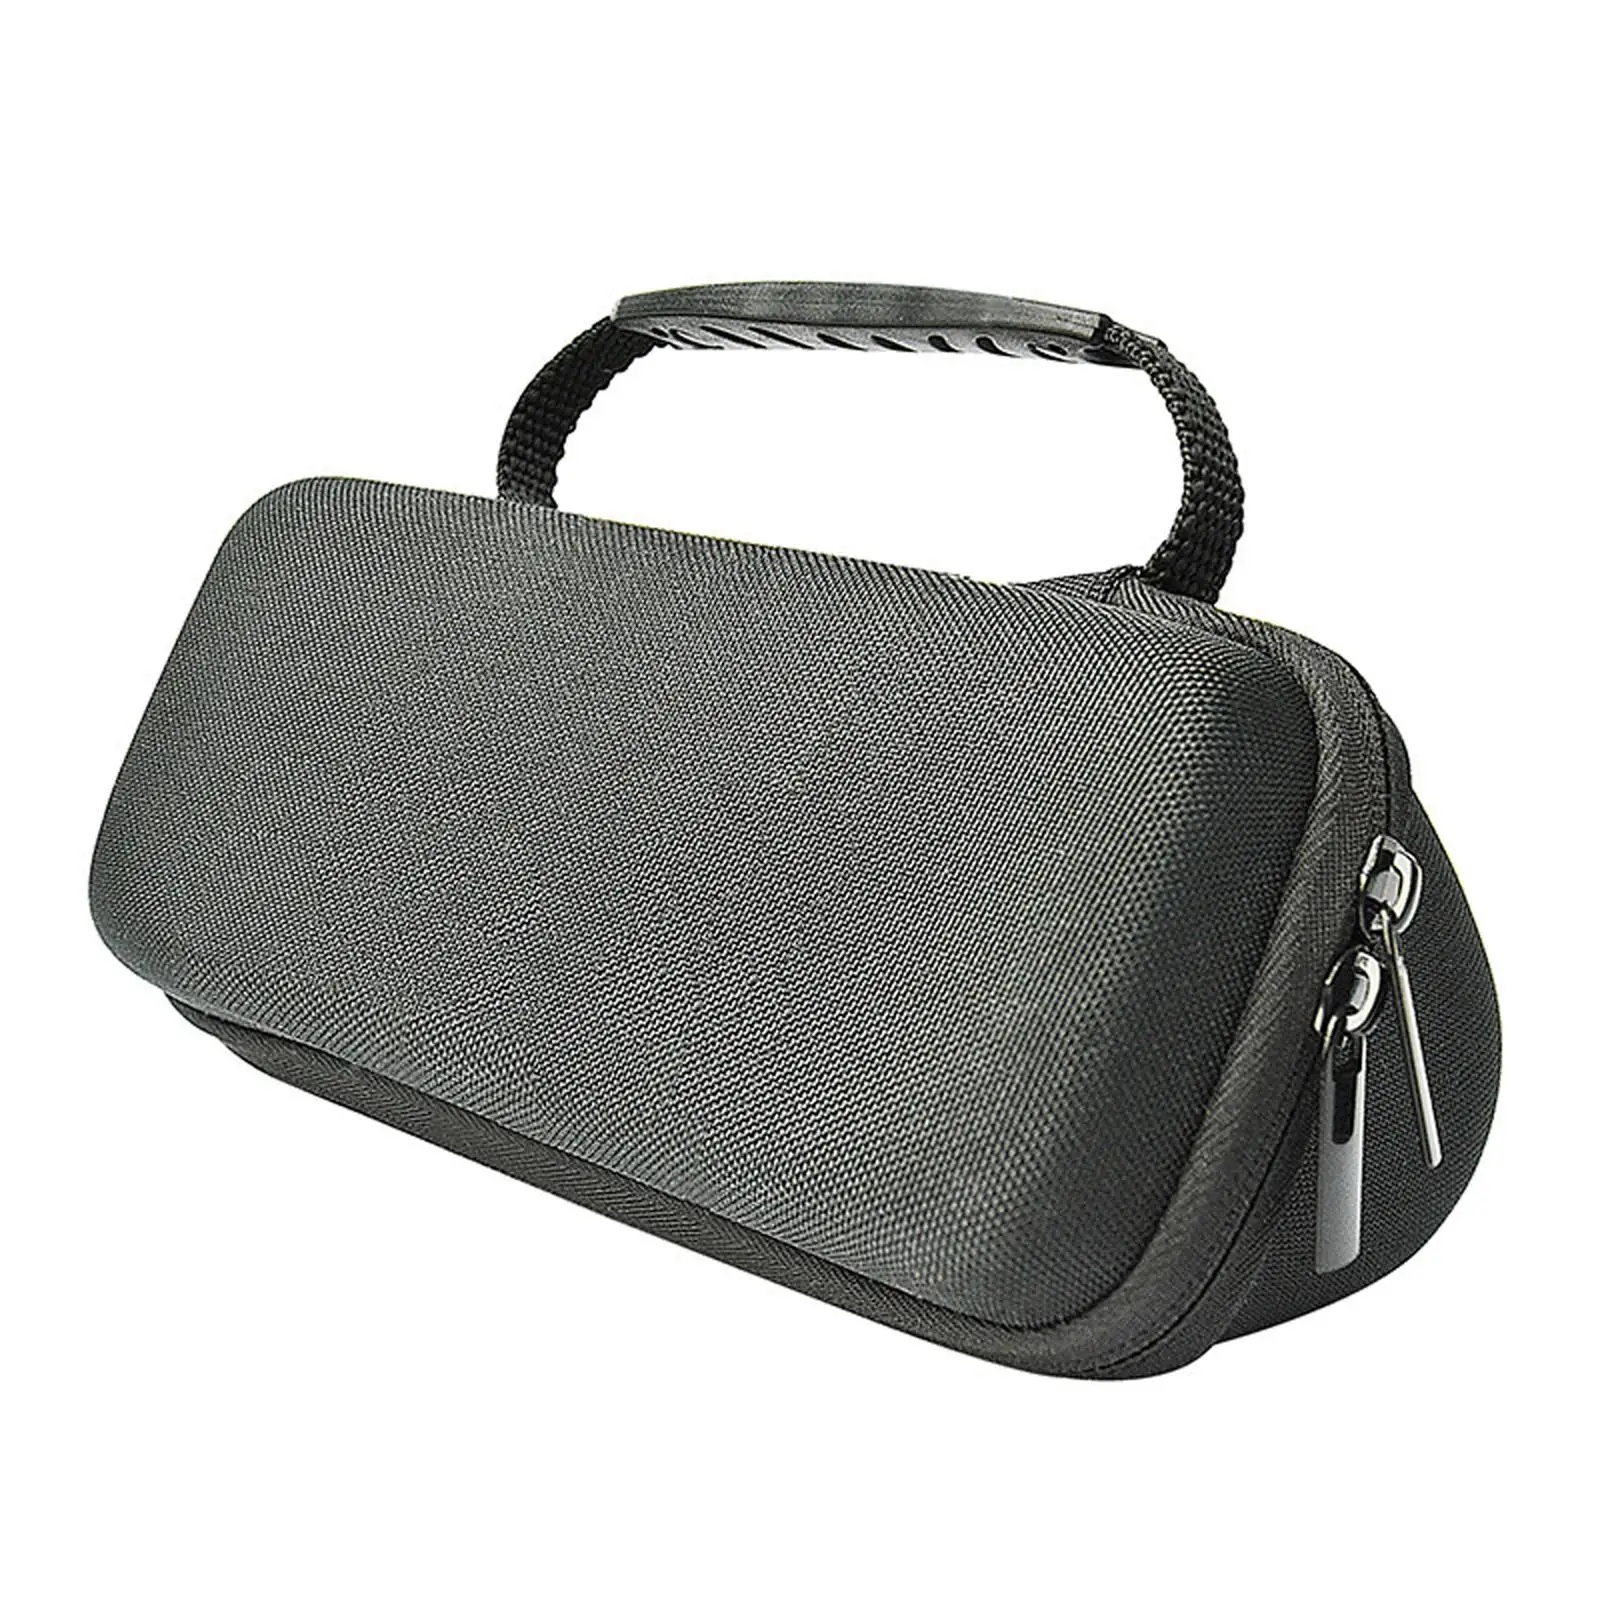 Carrying Case, Zippered Protector Cover for Roam Portable Smart Bluetooth Speaker